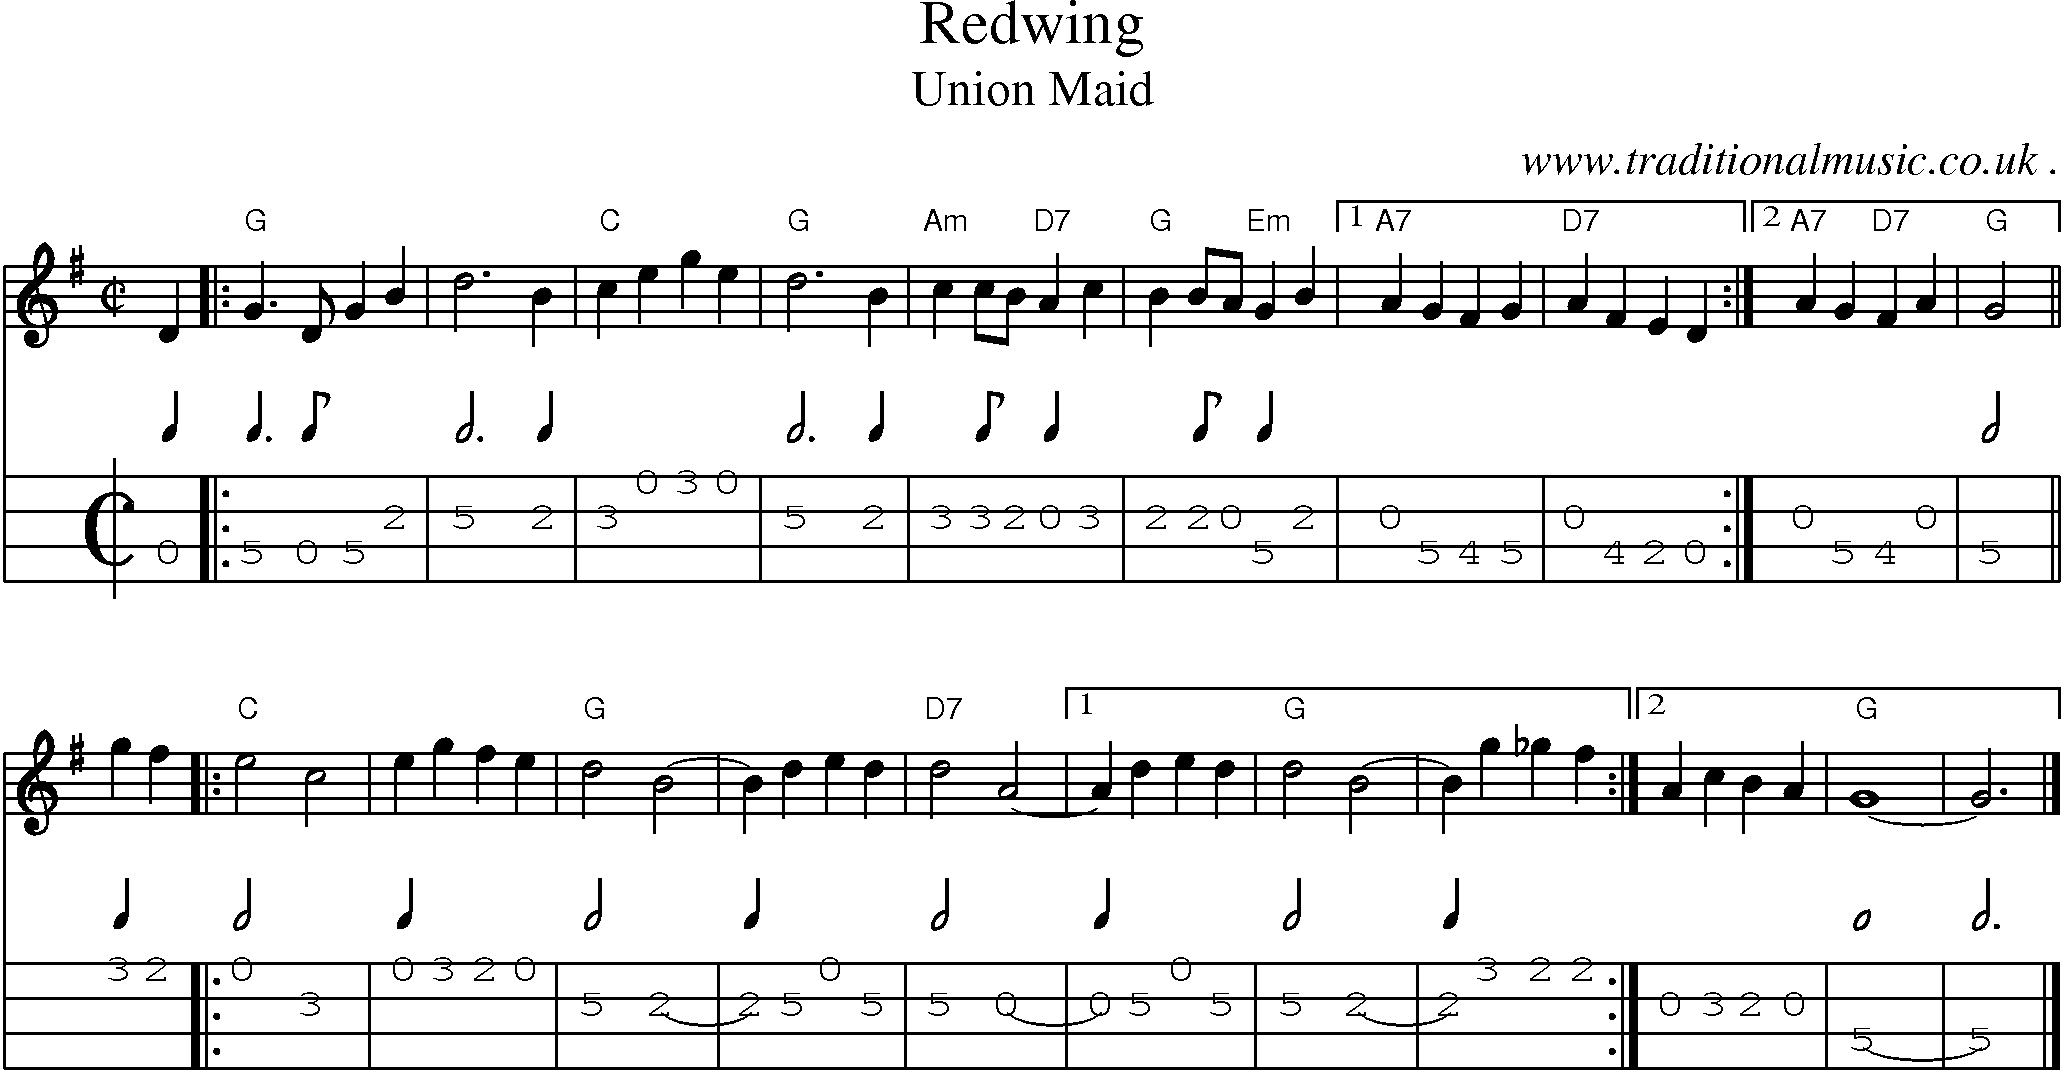 Sheet-music  score, Chords and Mandolin Tabs for Redwing